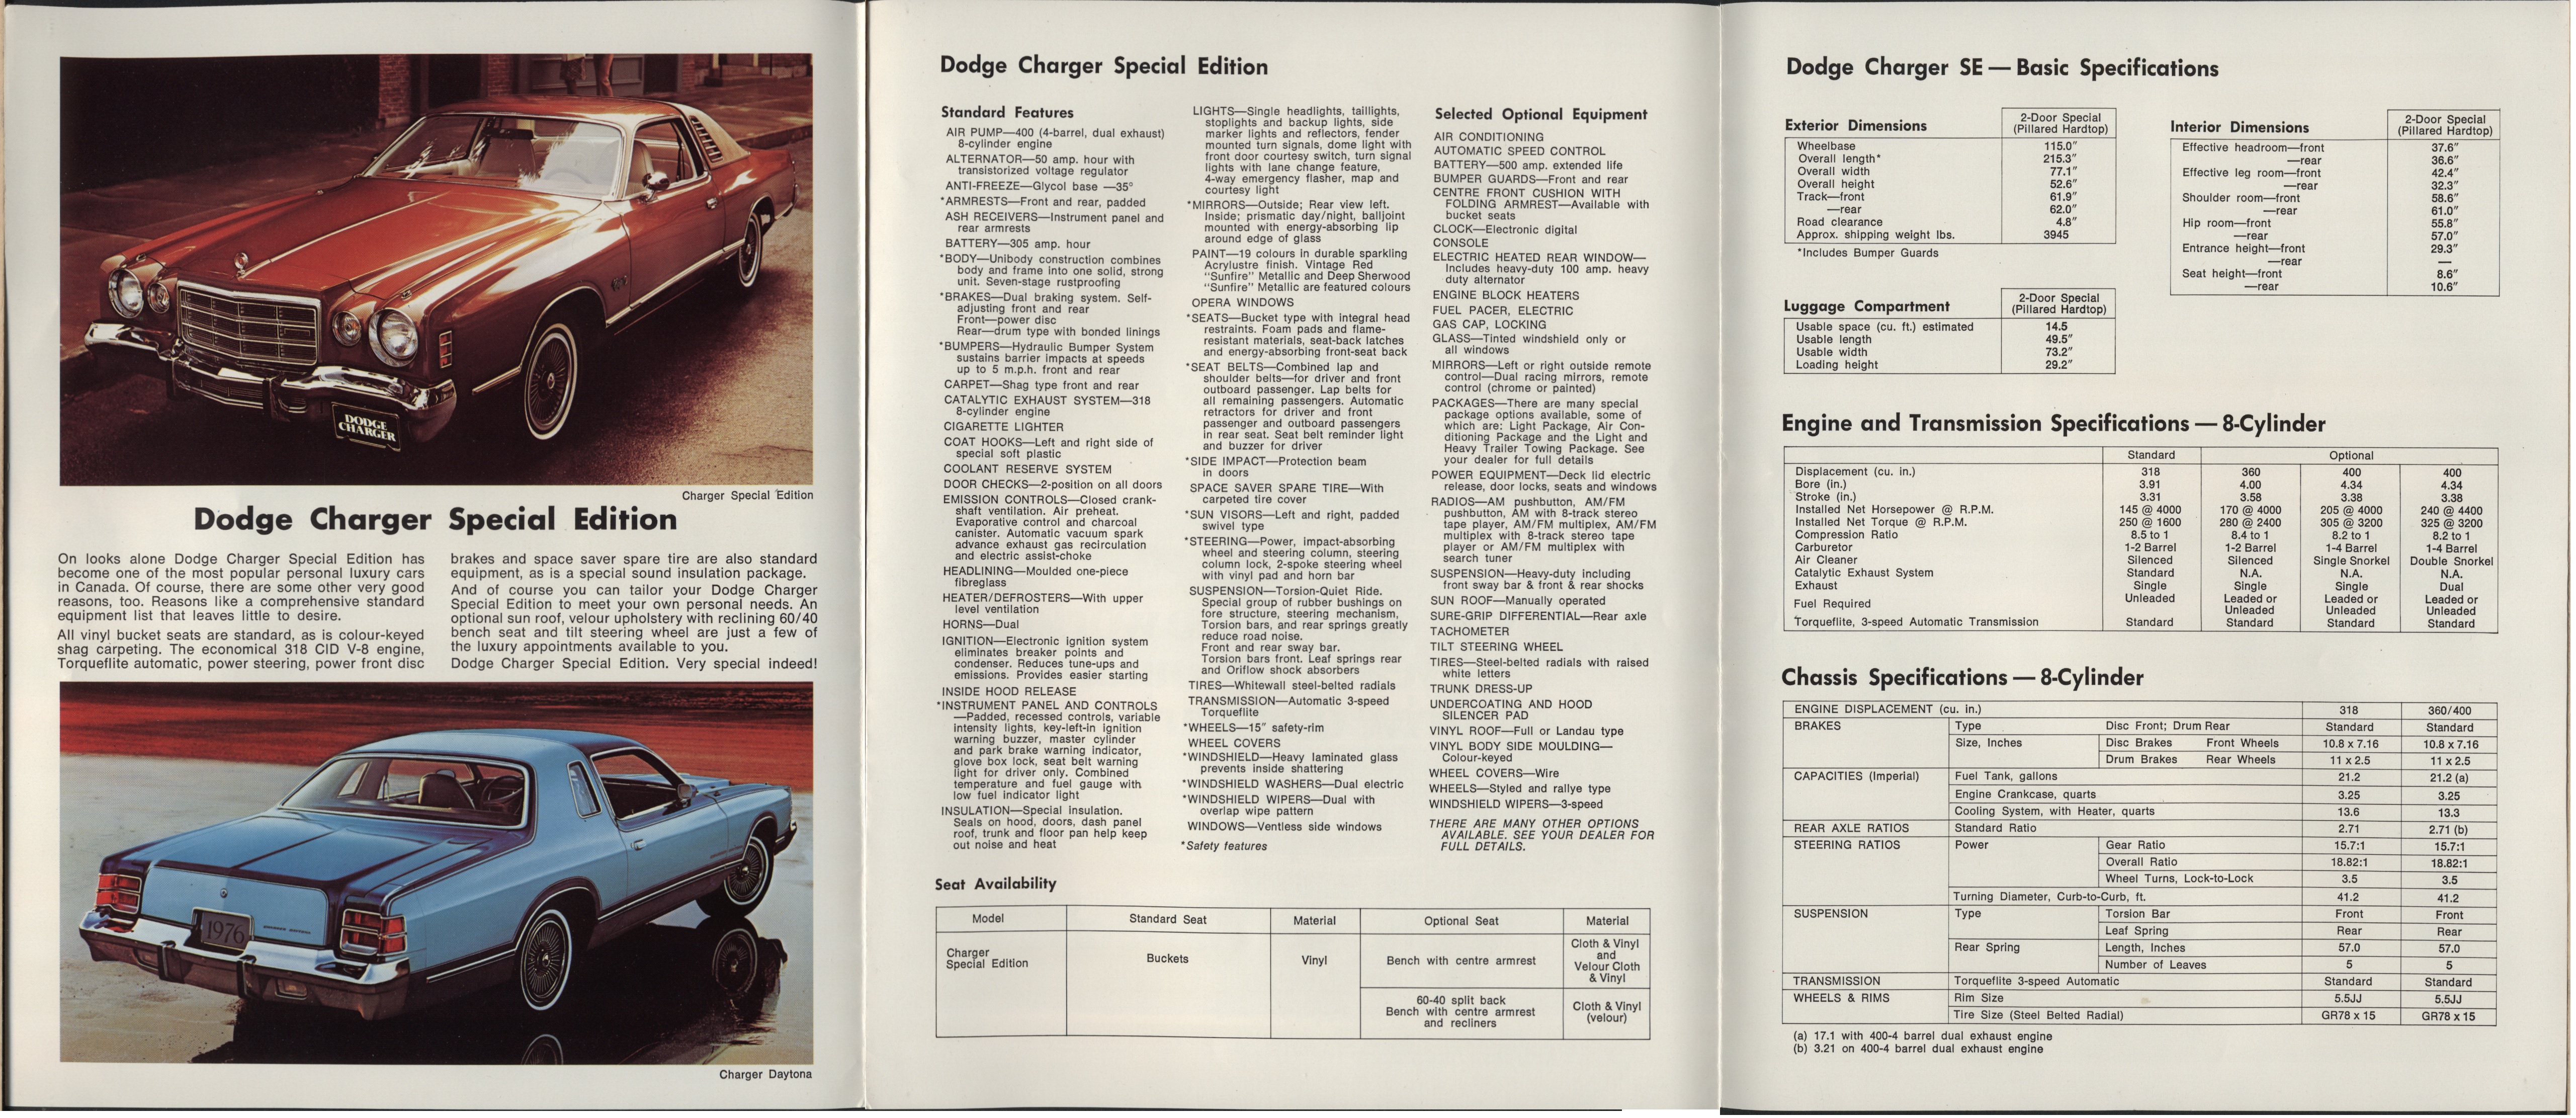 1976 Dodge Charger Special Edition Brochure Canada_02-03-04